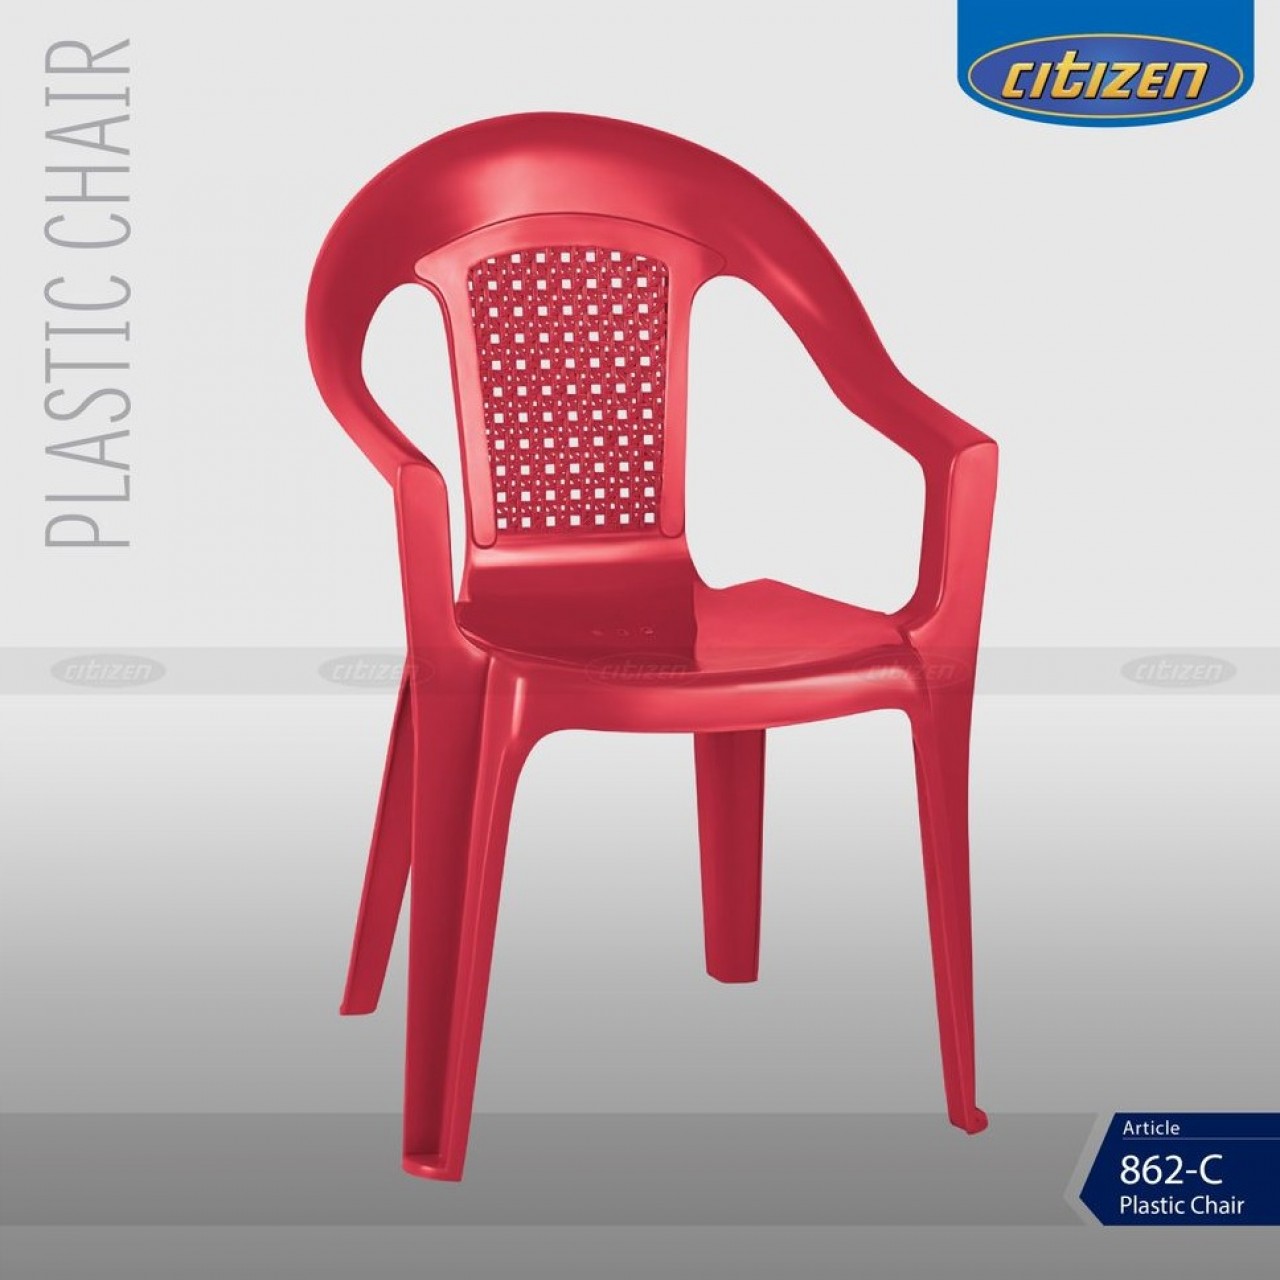 Citizen 862-C Full Plastic Regular Chair With Arms